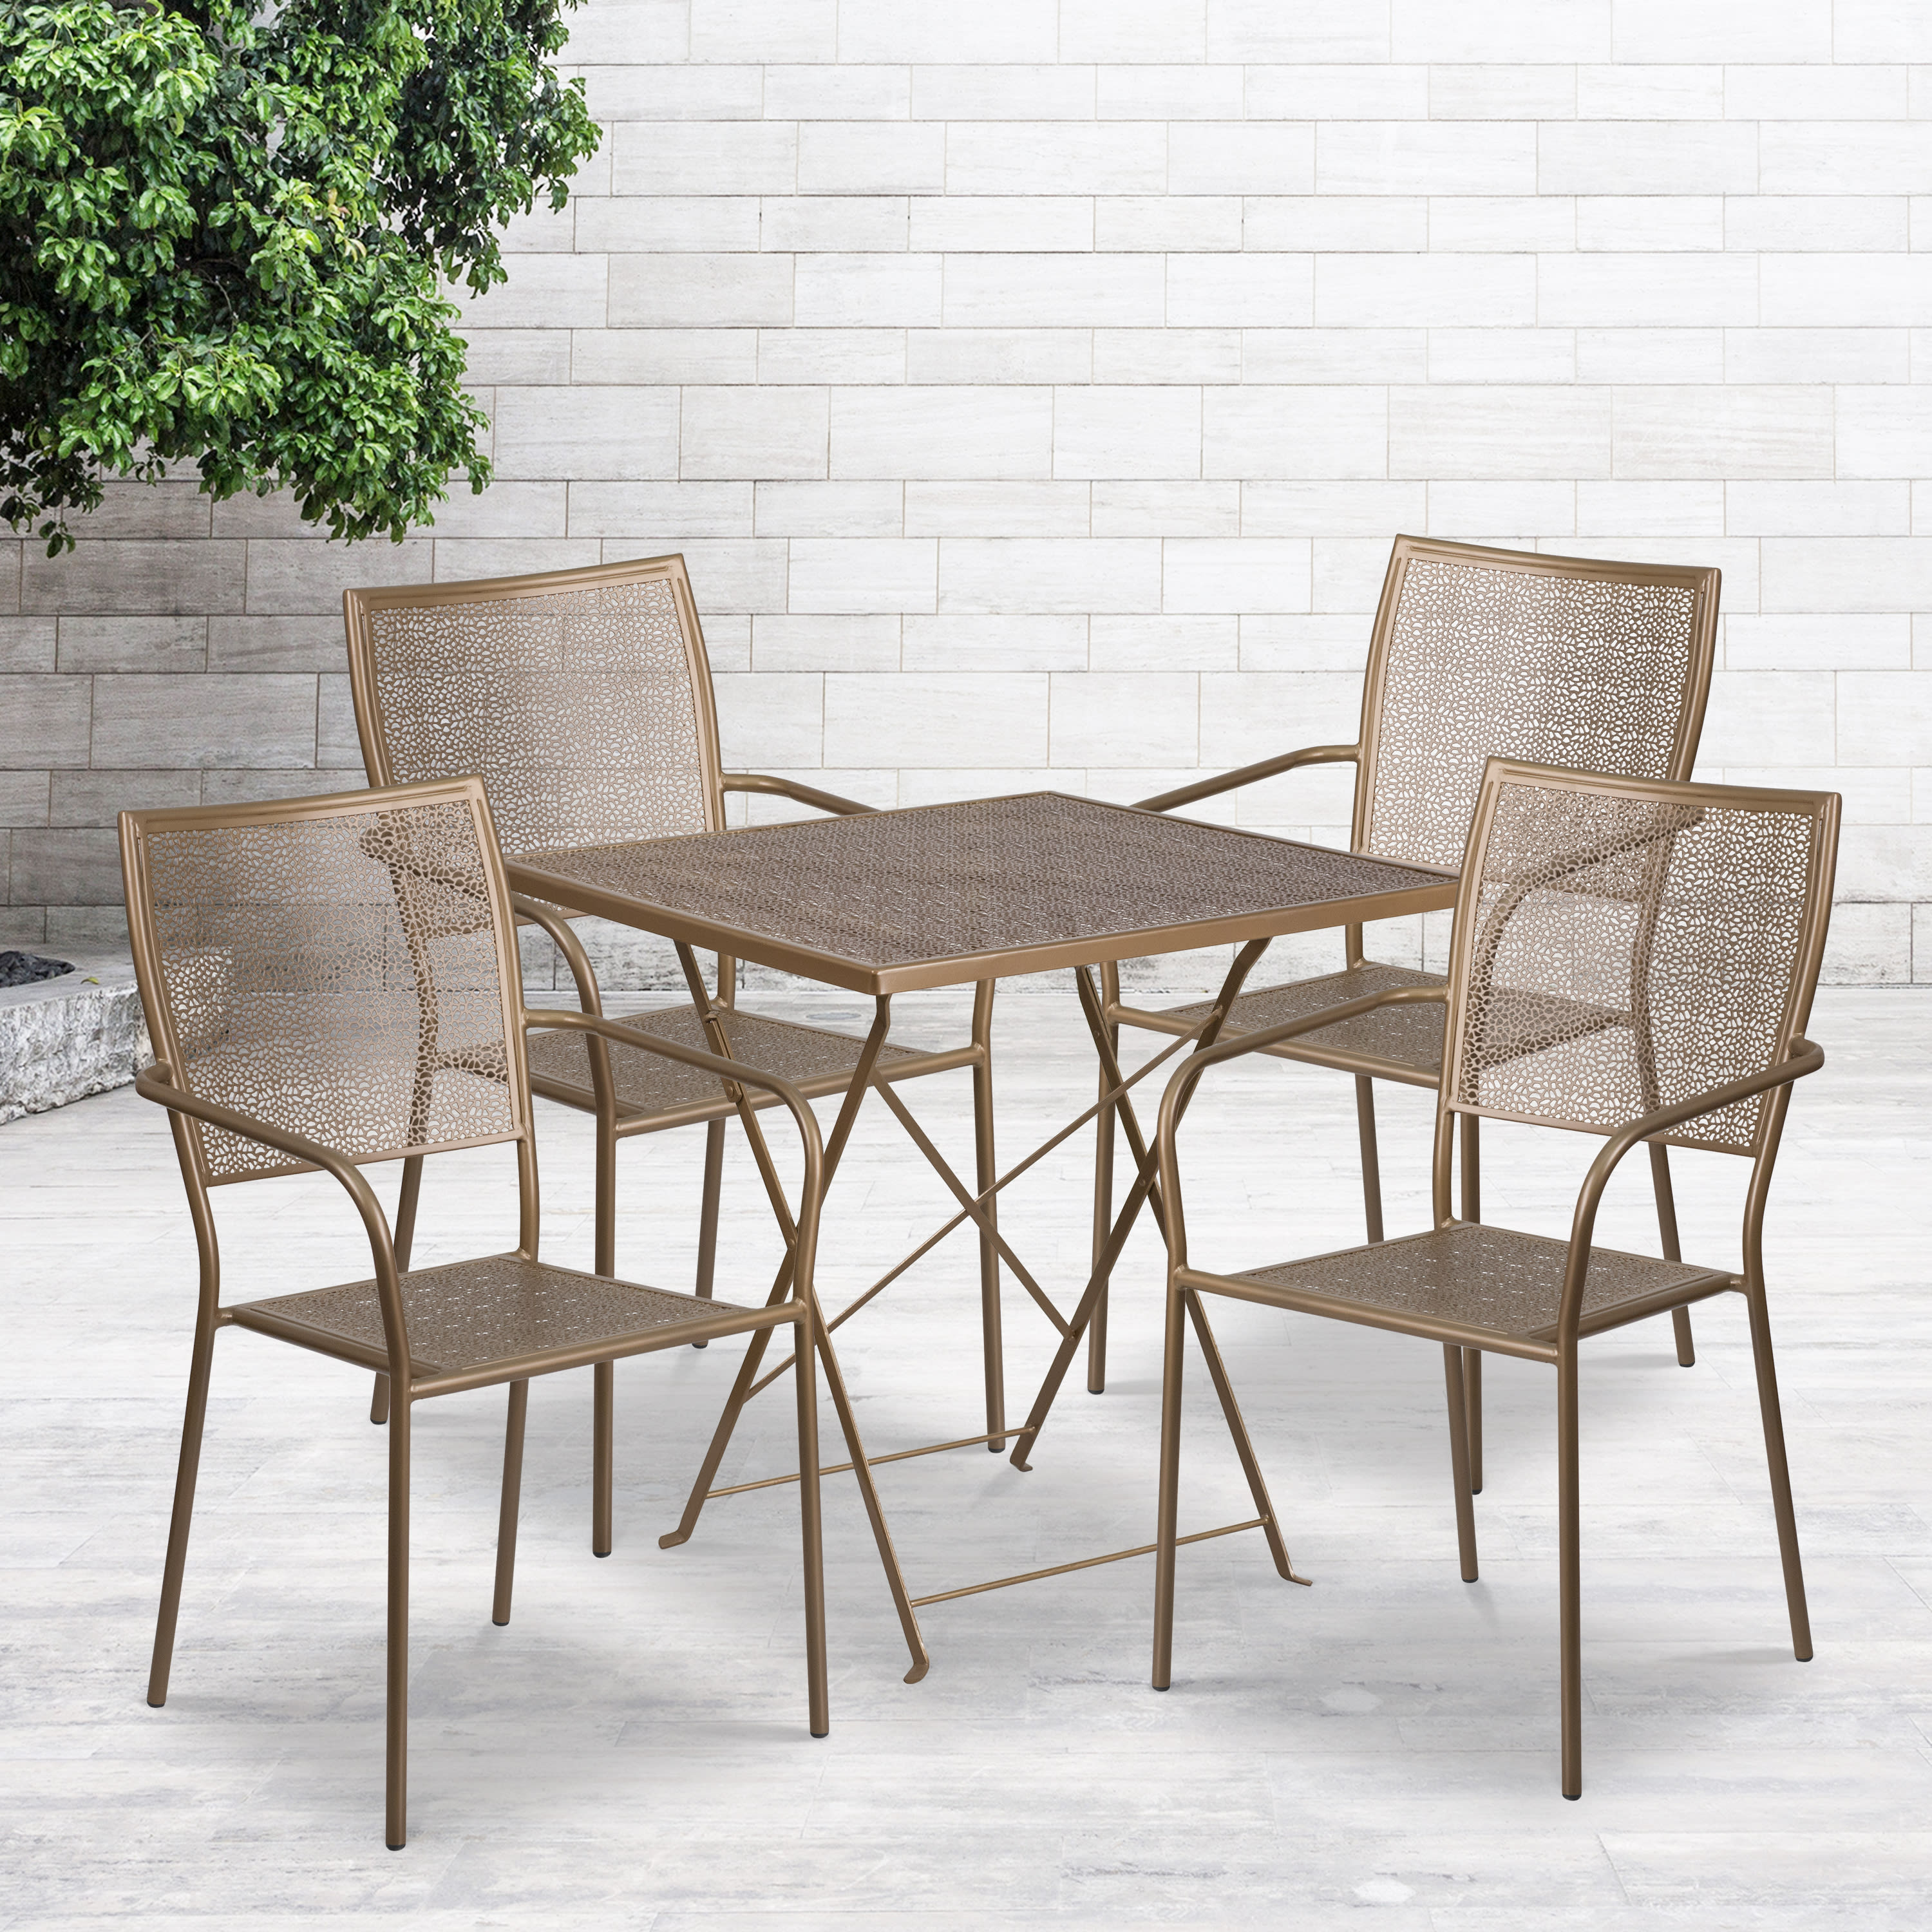 Flash Furniture Commercial Grade 28" Square Gold Indoor-Outdoor Steel Folding Patio Table Set with 4 Square Back Chairs - image 1 of 5